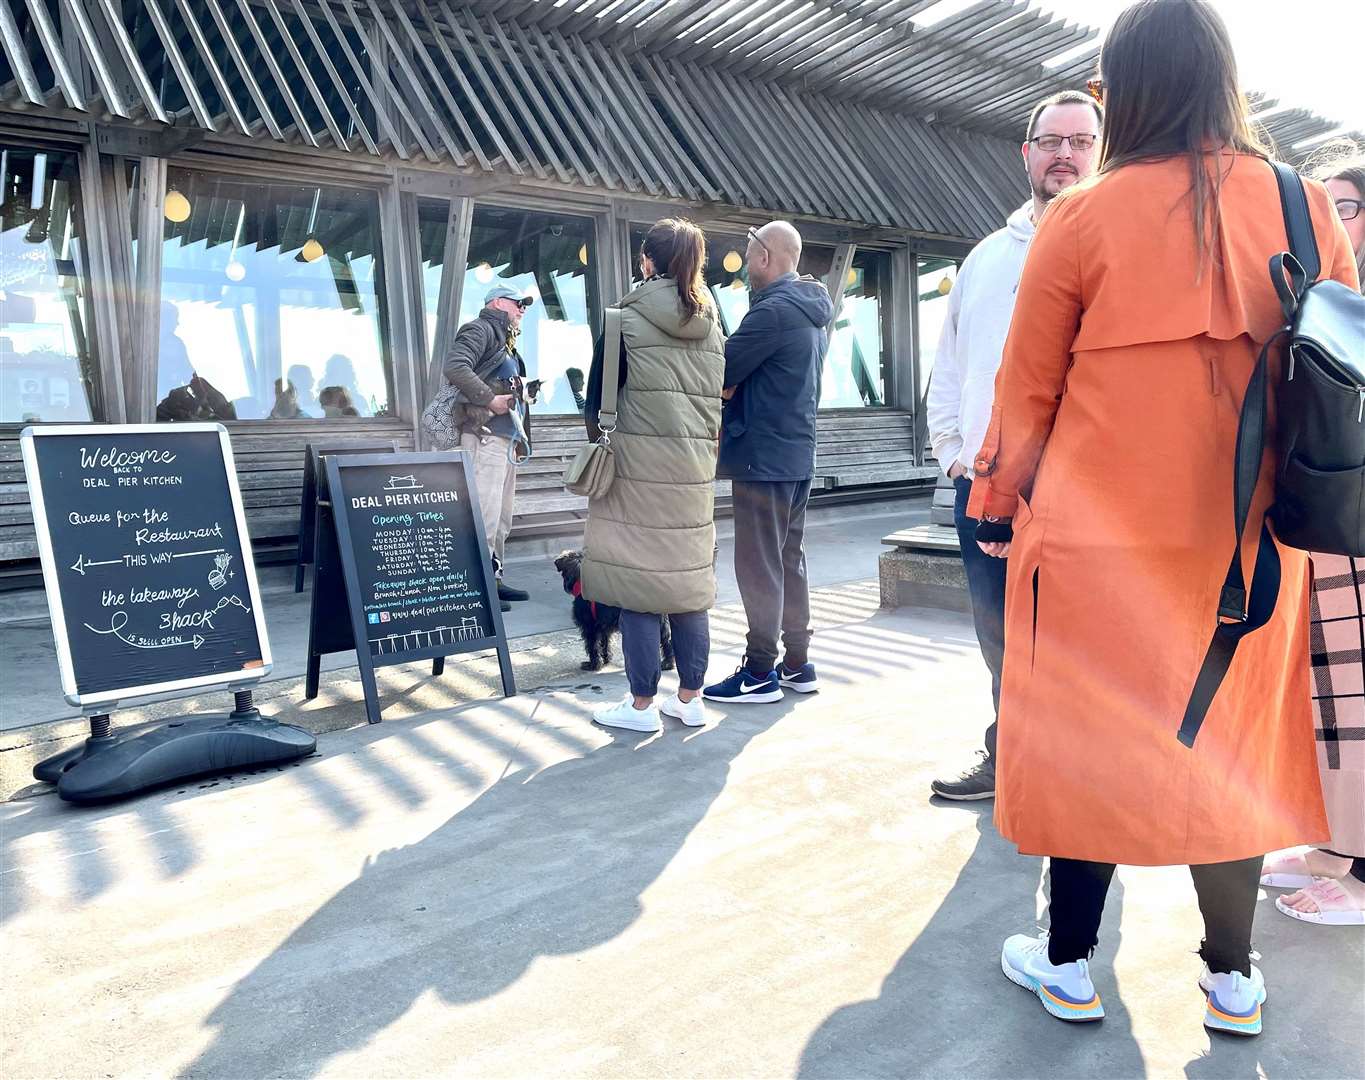 Diners waiting to get into Deal Pier Kitchen